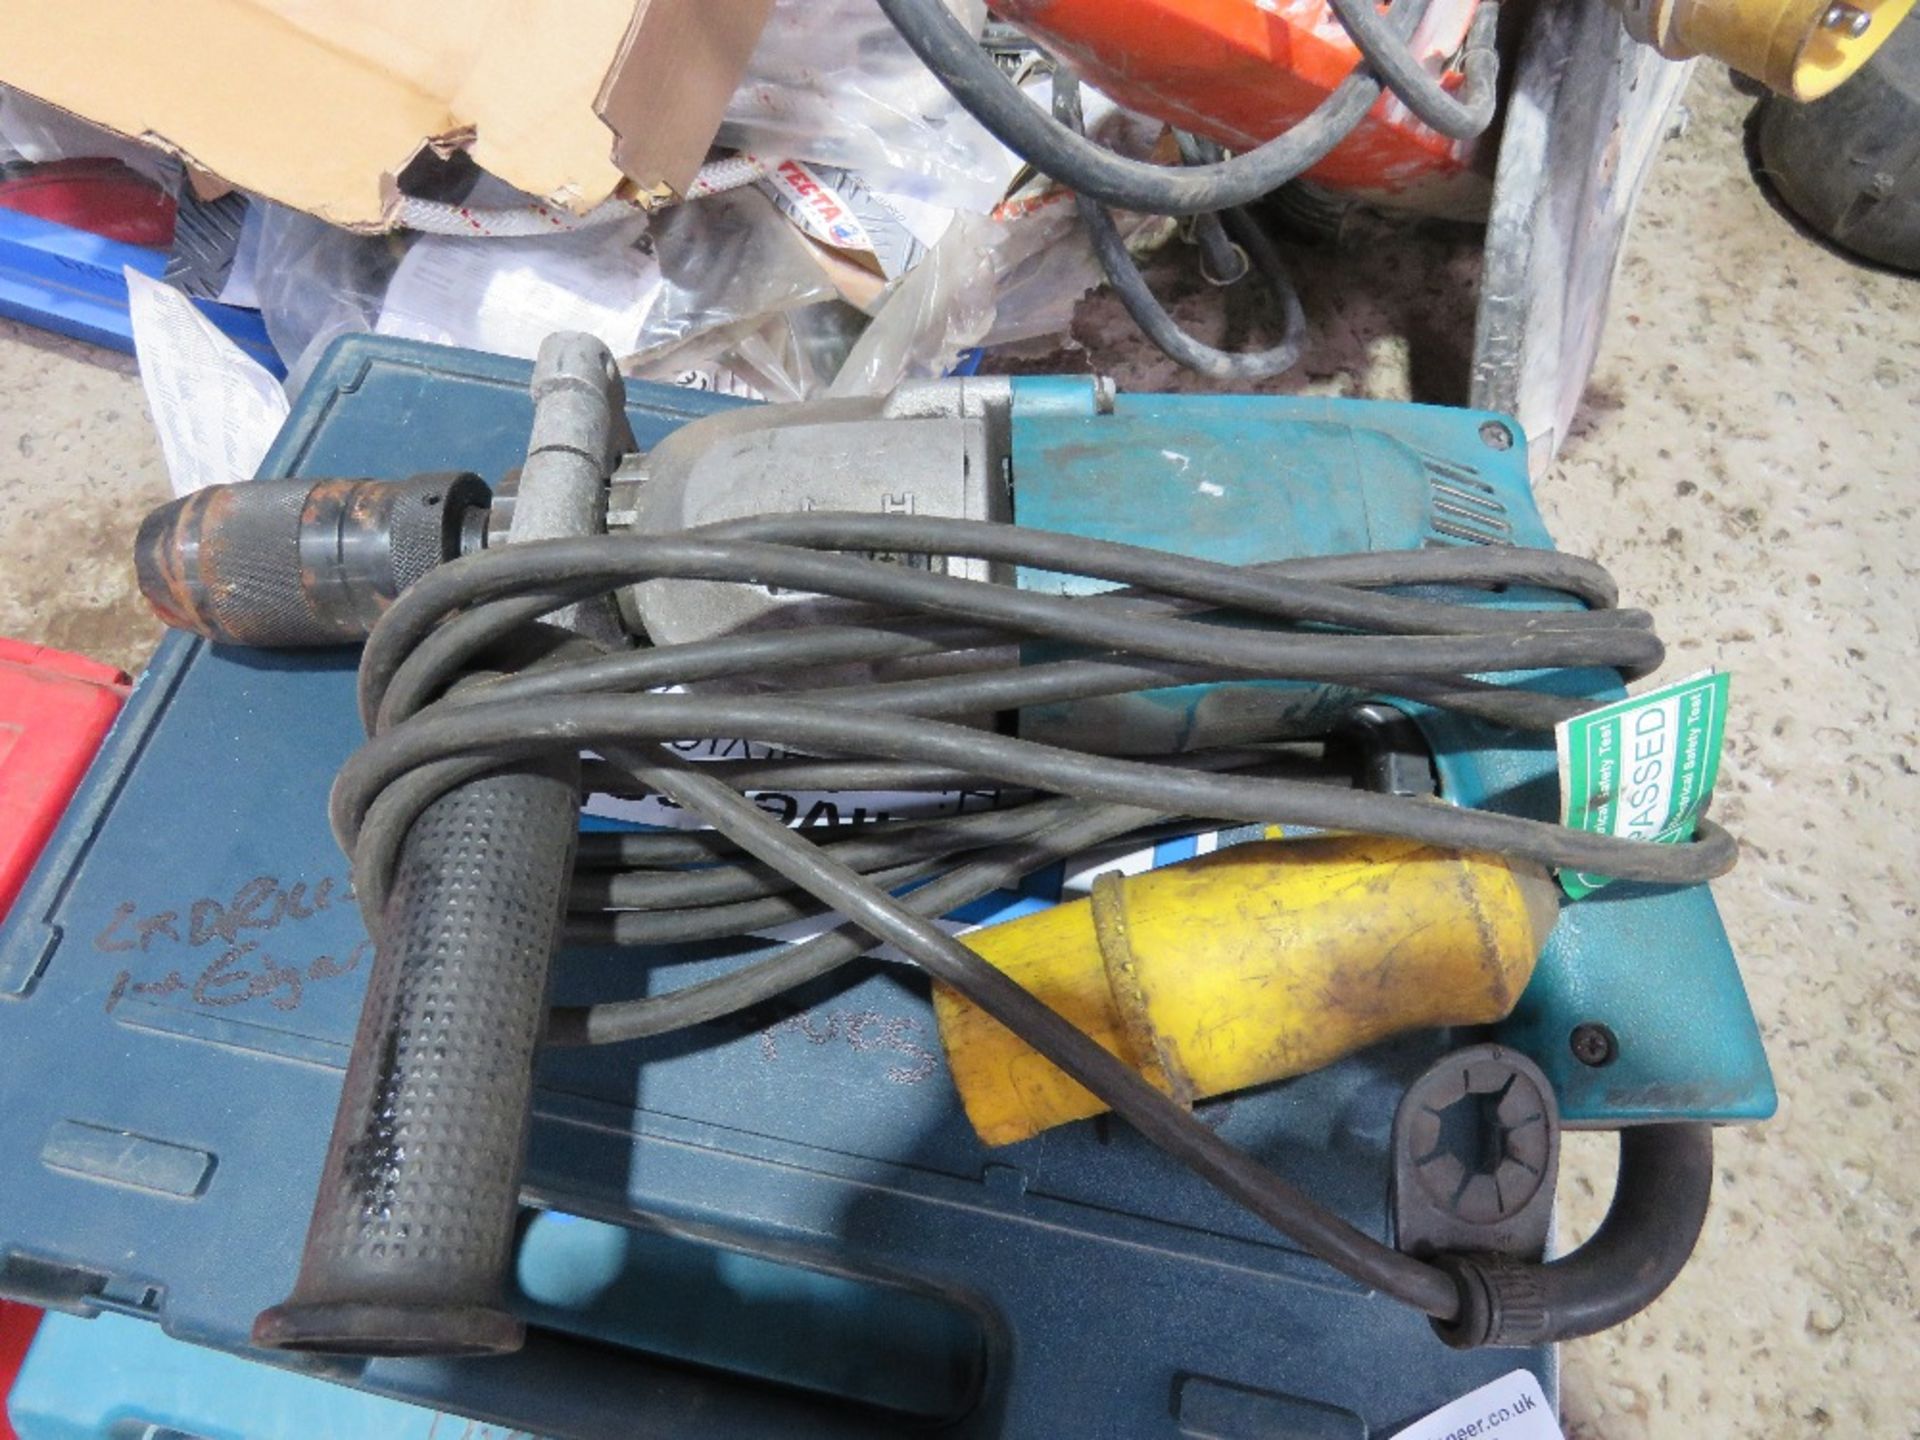 3 X POWER TOOLS. (2NO DRILLS PLUS AN EDGING SANDER). - Image 2 of 5